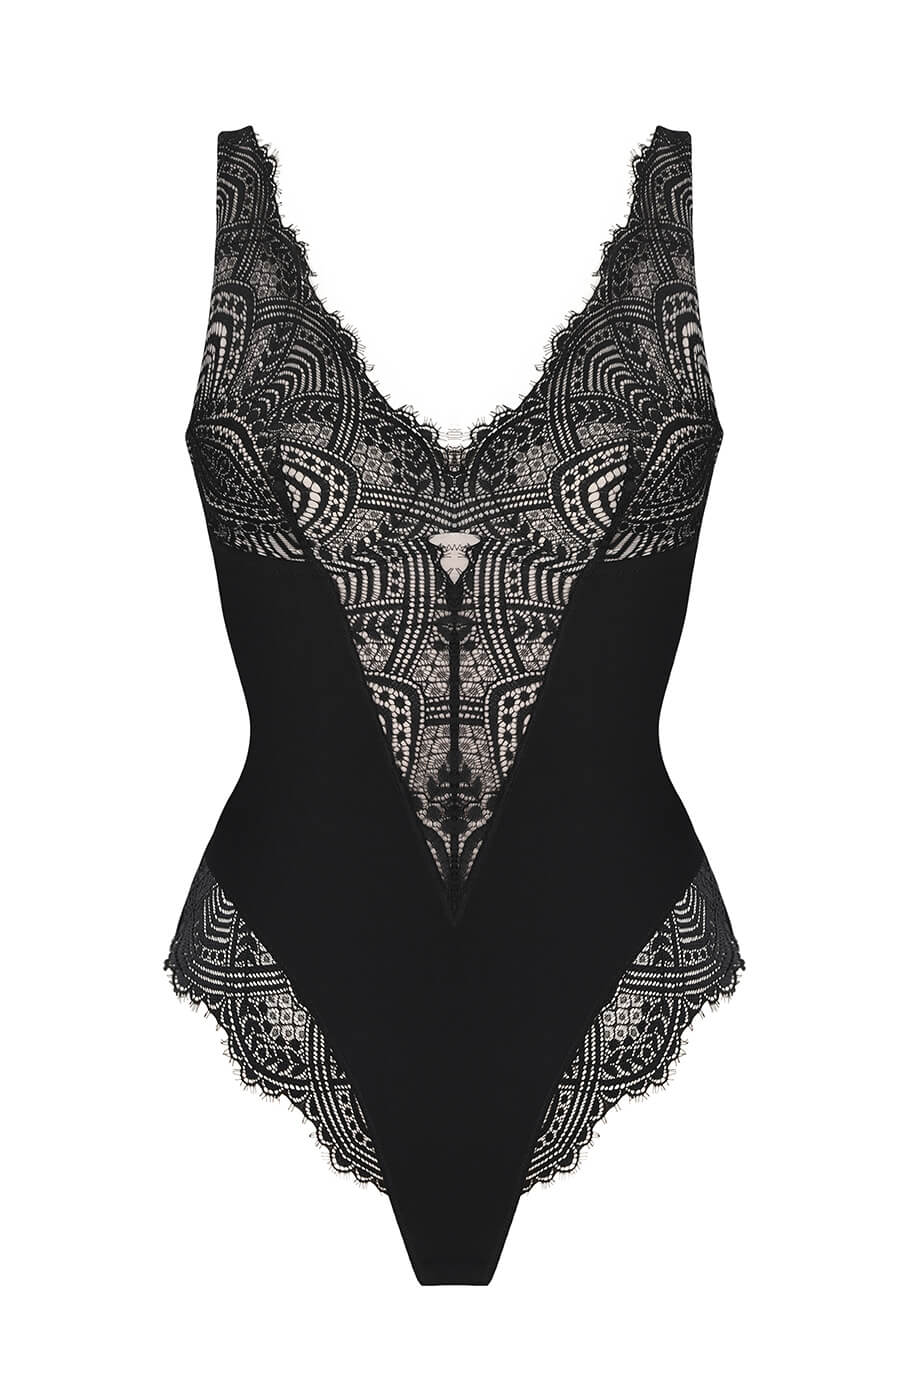 AirSlim® Go Braless Shaping Lace Bodysuit